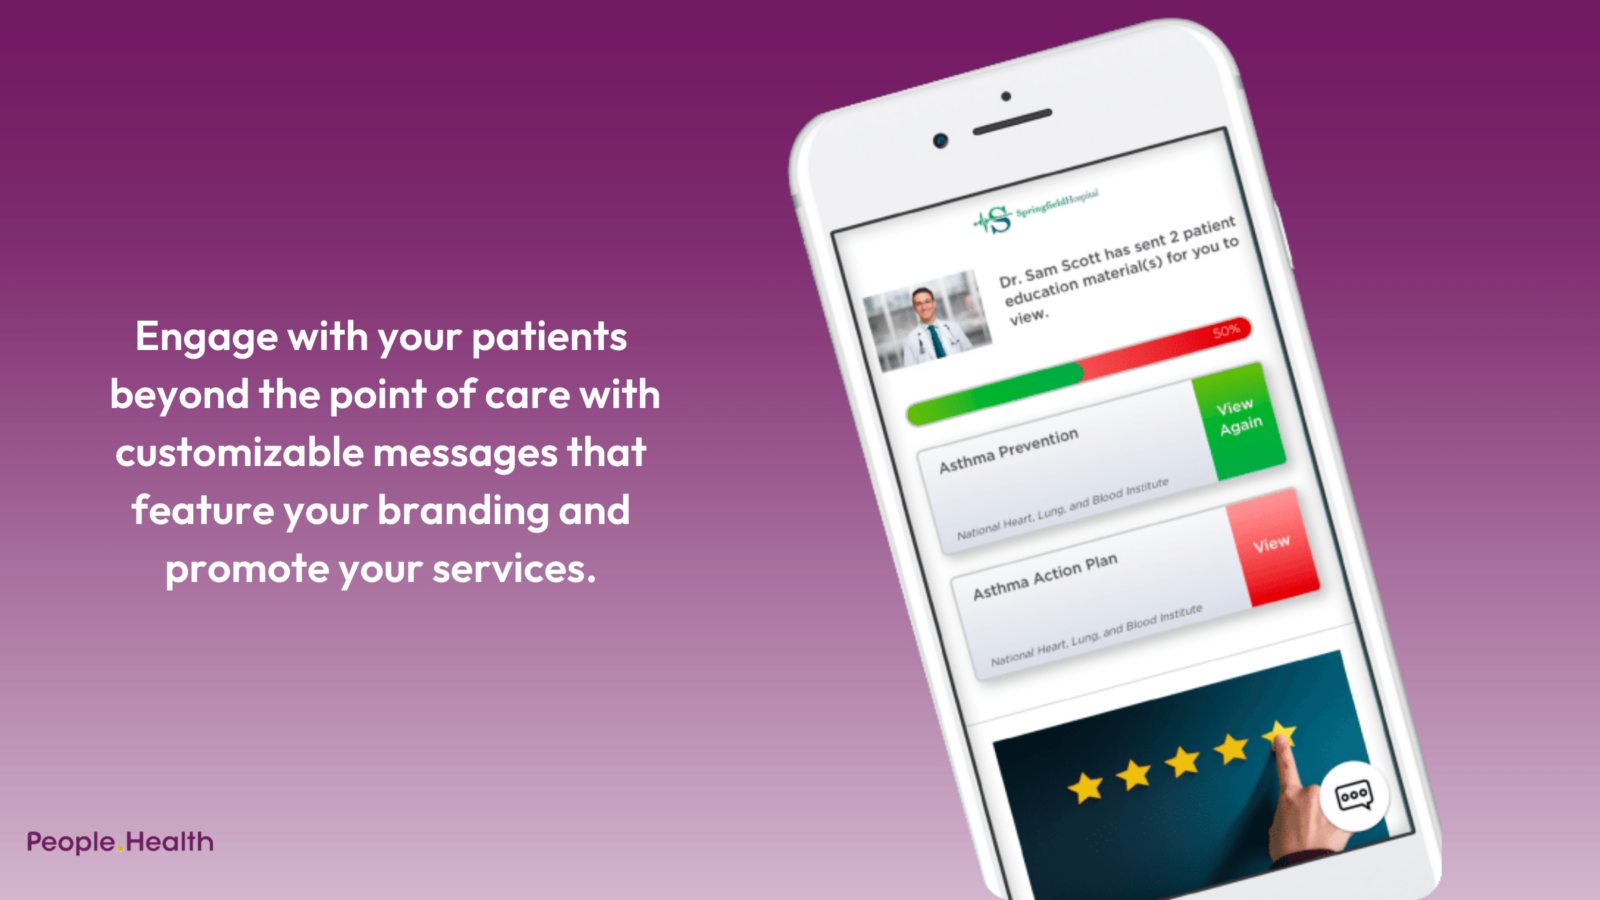 Engage with your patients beyond the point of care with customizable messages that feature your branding and promote your services.